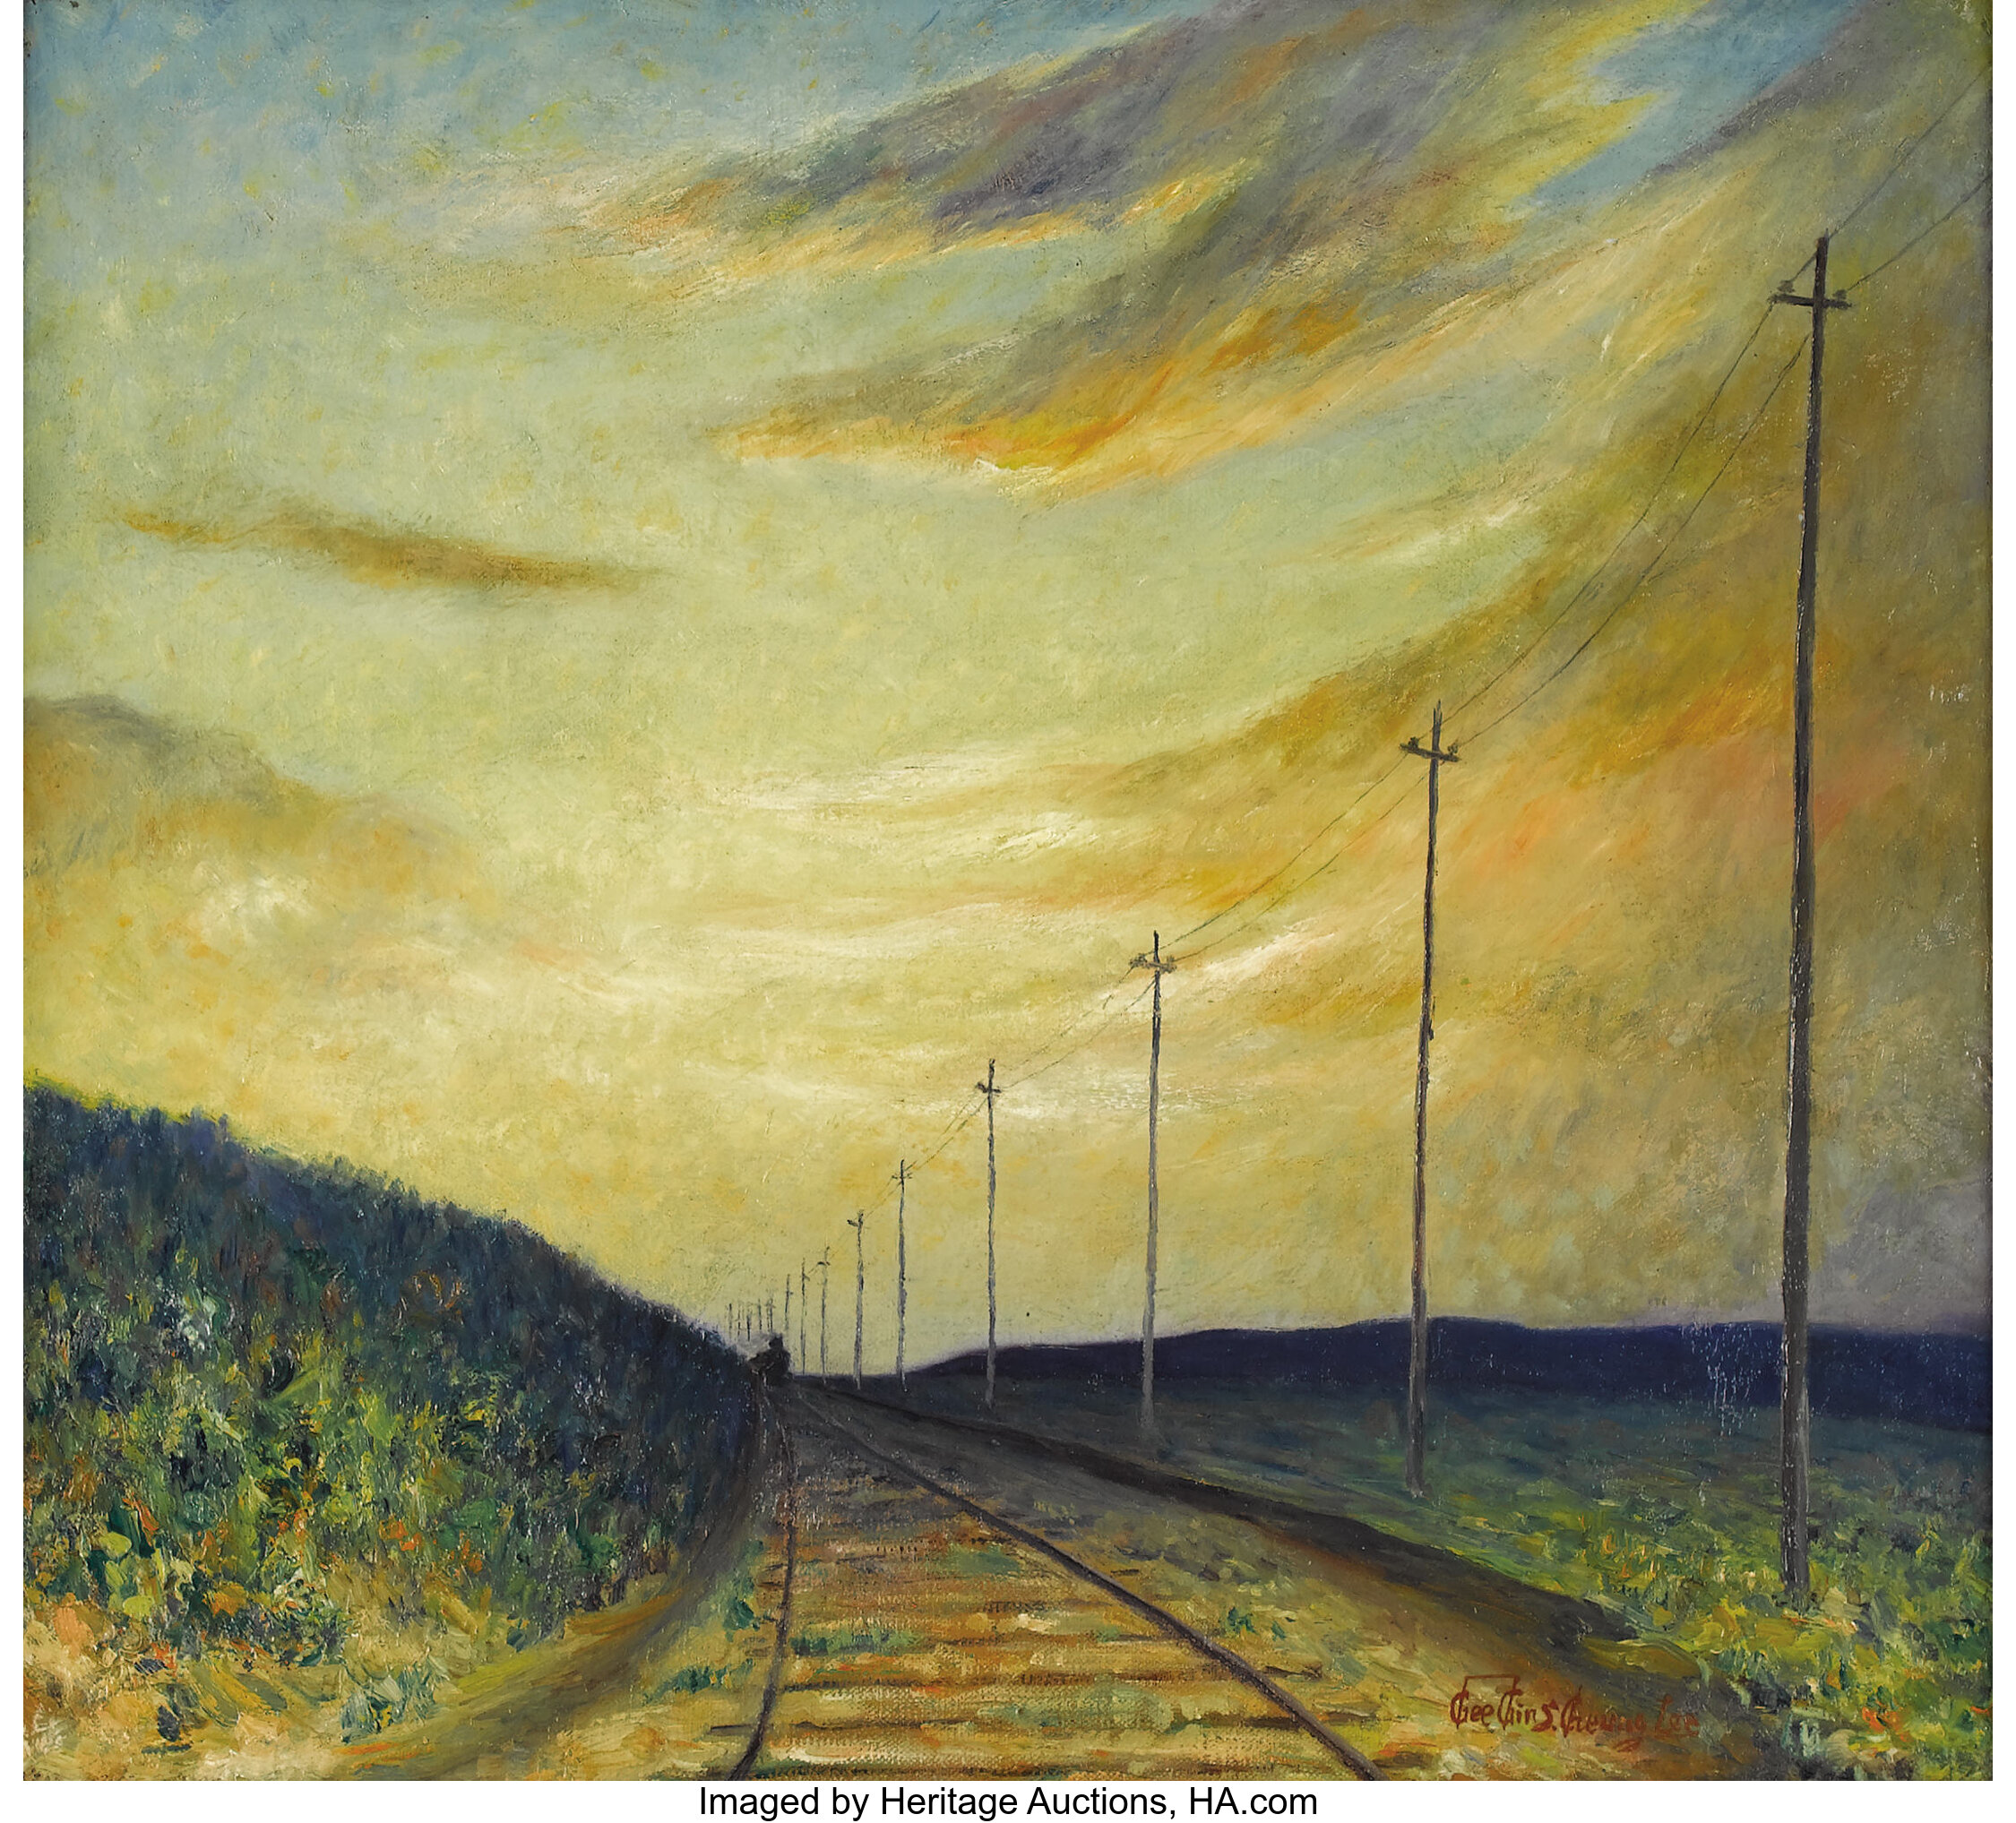 CHEE CHIN S. CHEUNG LEE (Chinese-American 1896-1966). The Railroad. | Lot  #23123 | Heritage Auctions